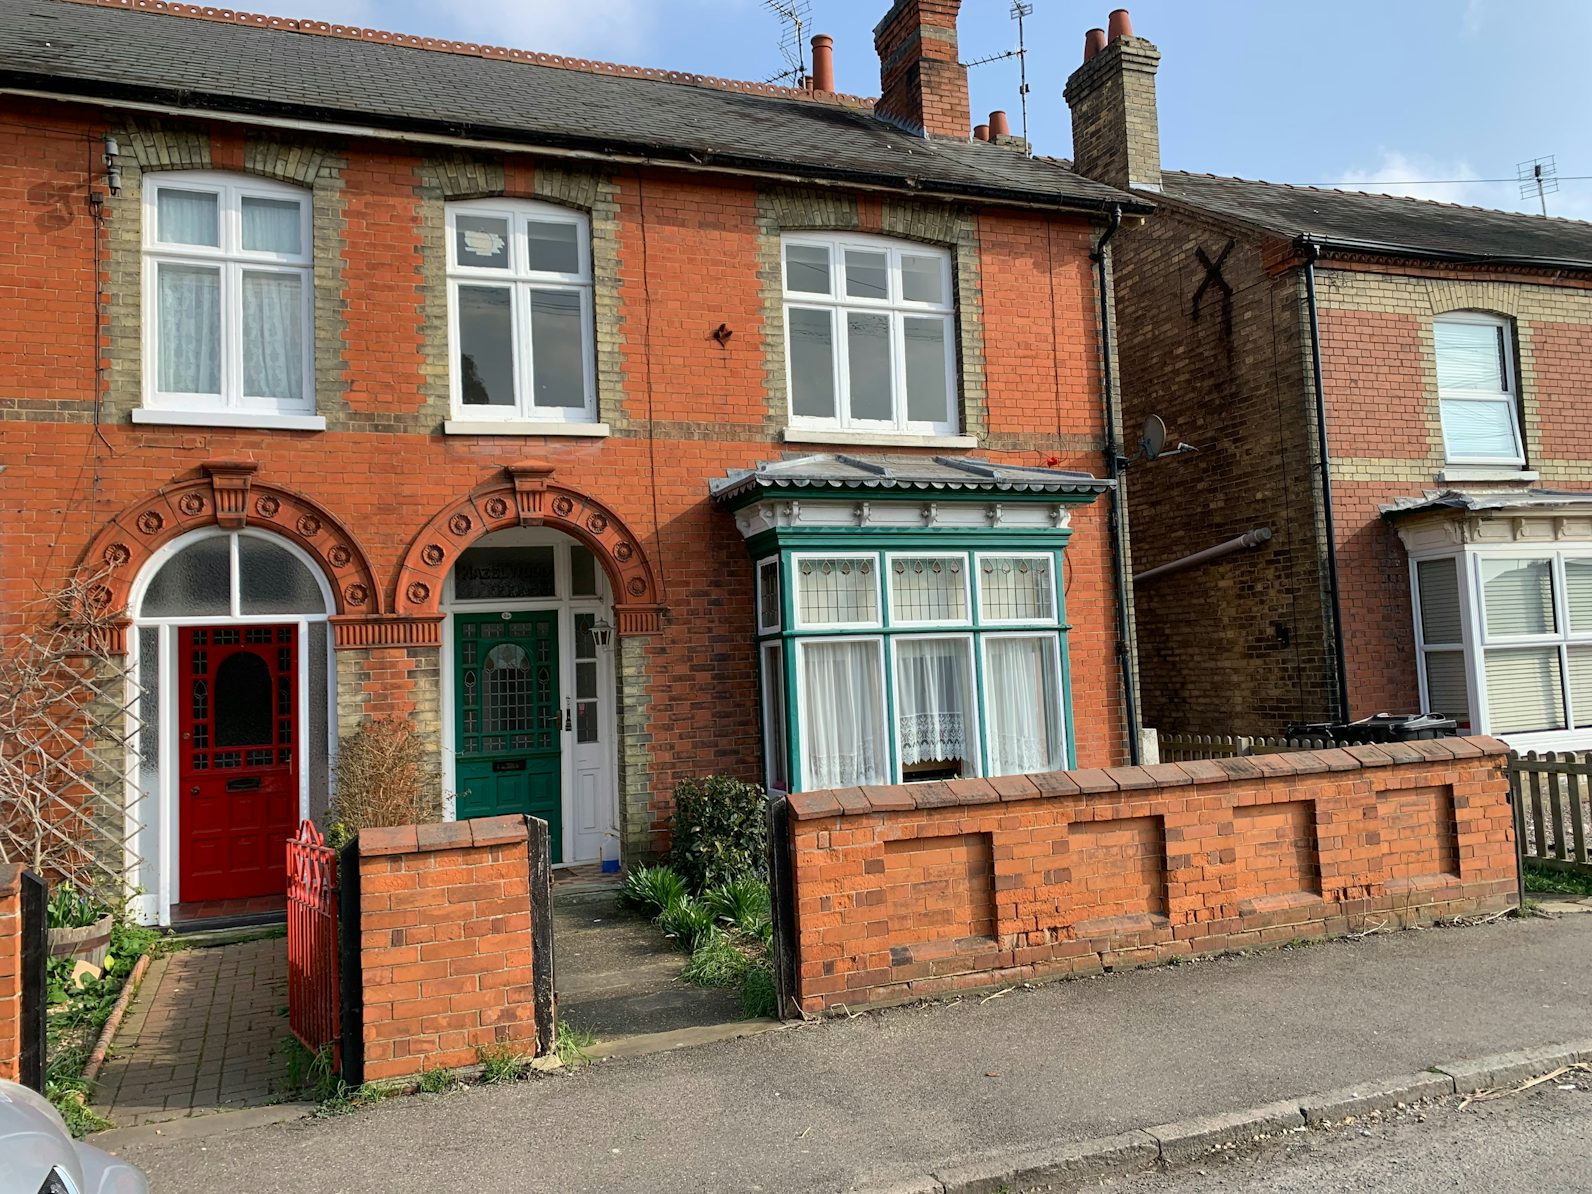 Flat to rent on Holland Road Spalding, PE11